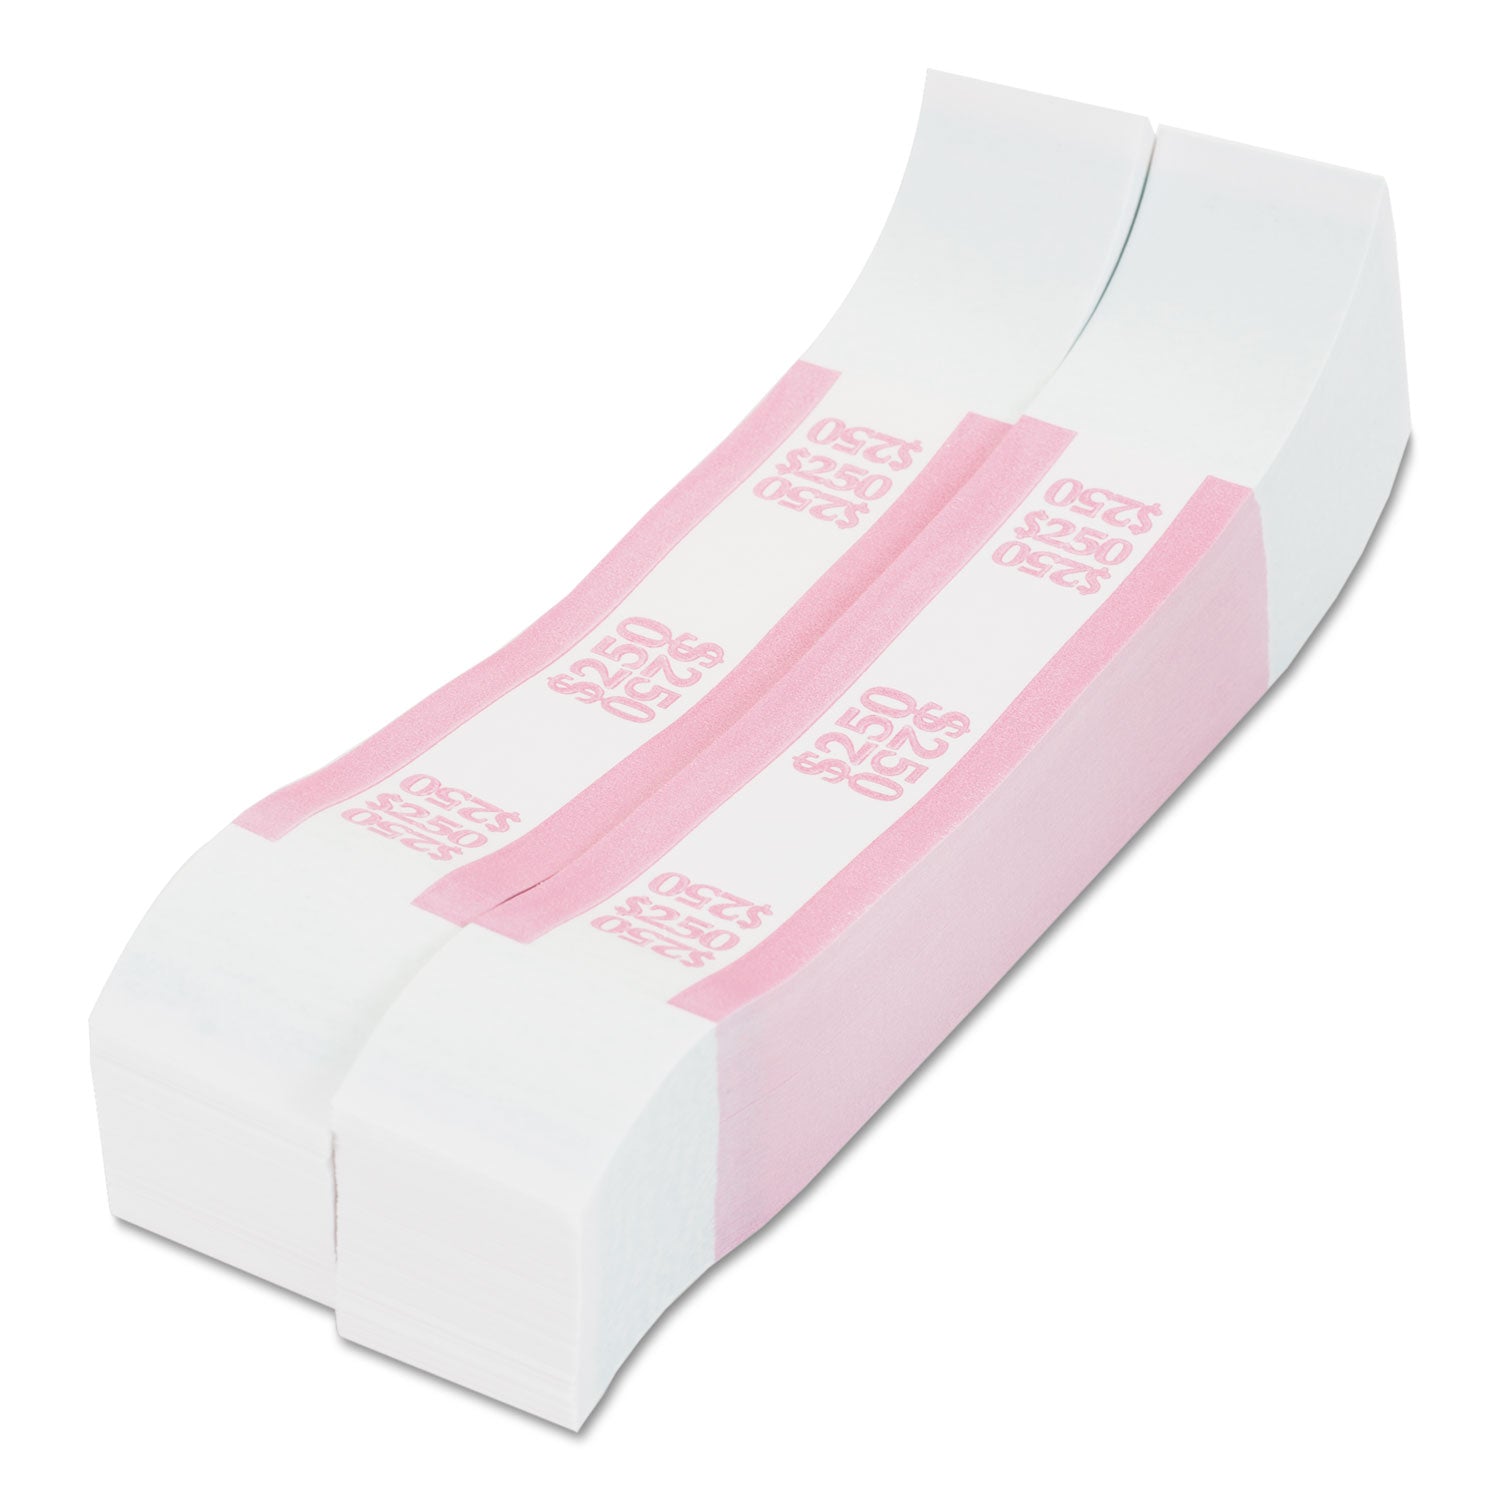 Currency Straps, Pink, $250 in Dollar Bills, 1000 Bands/Pack - 